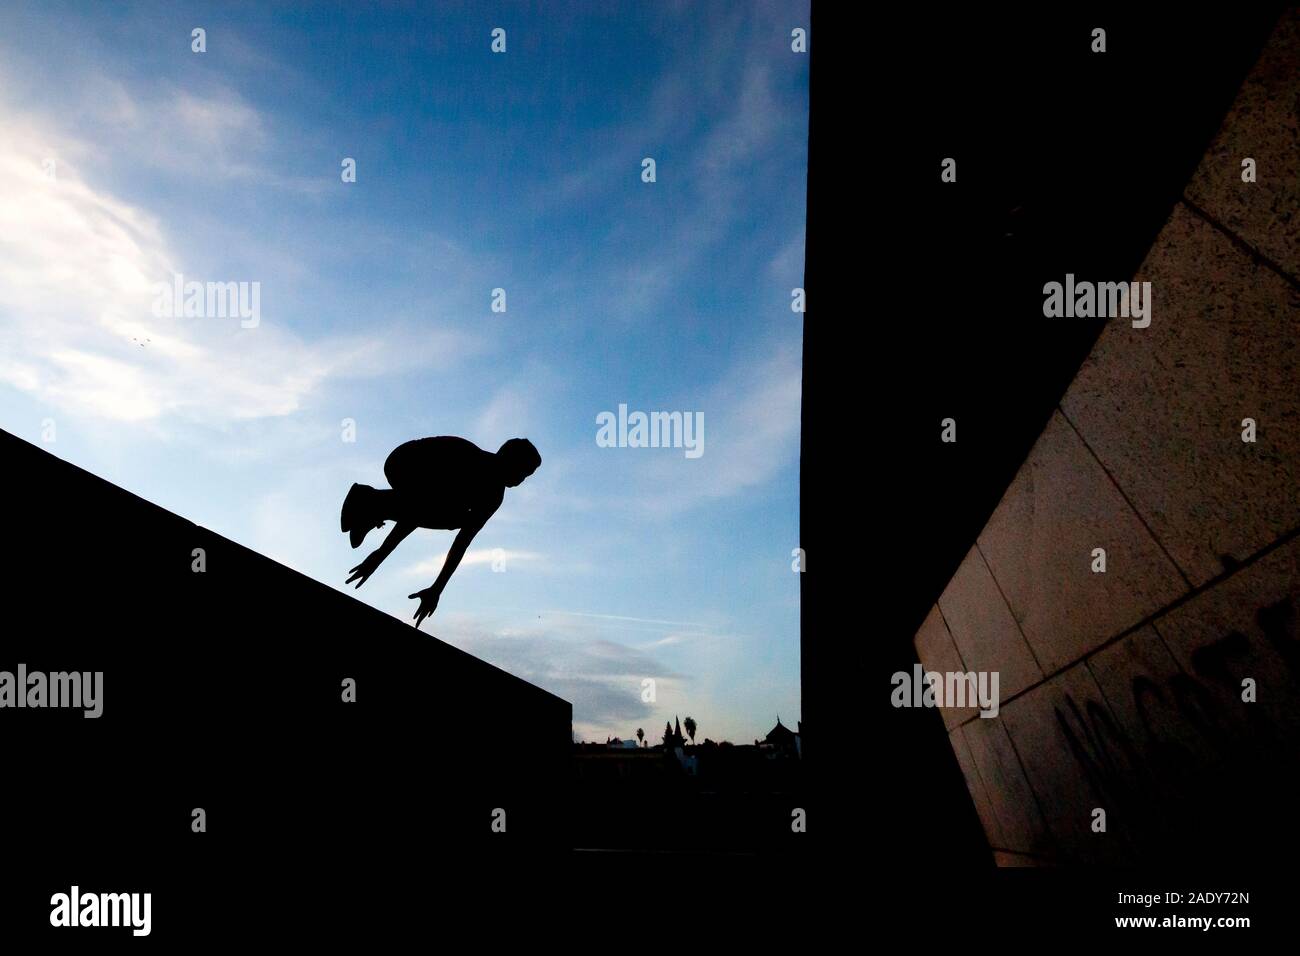 Young man practicing parkour in the street with a blue sky and backlight Stock Photo